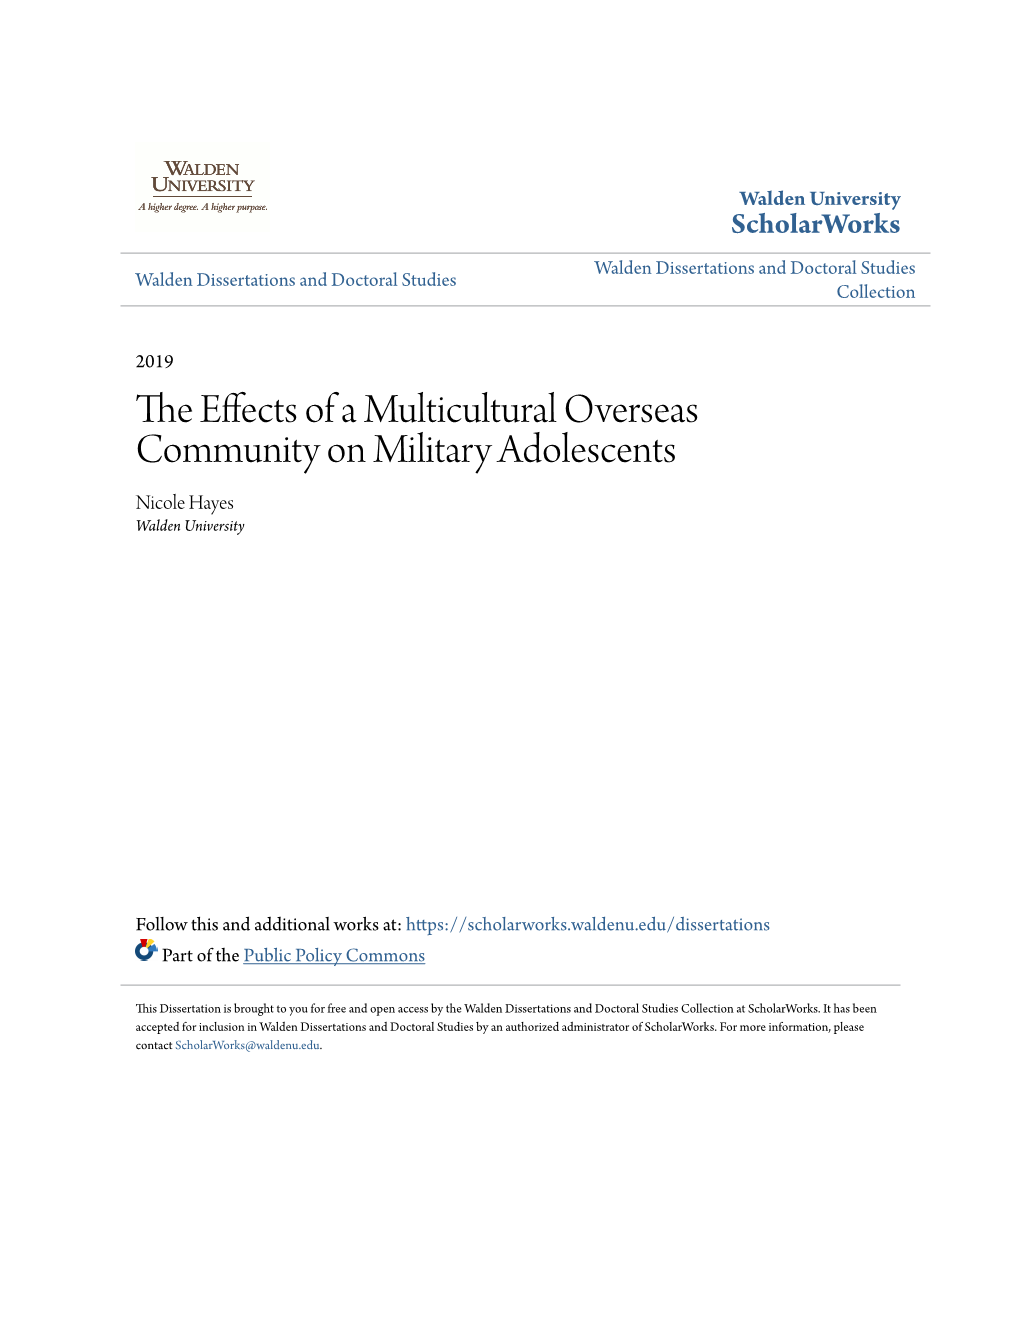 The Effects of a Multicultural Overseas Community on Military Adolescents